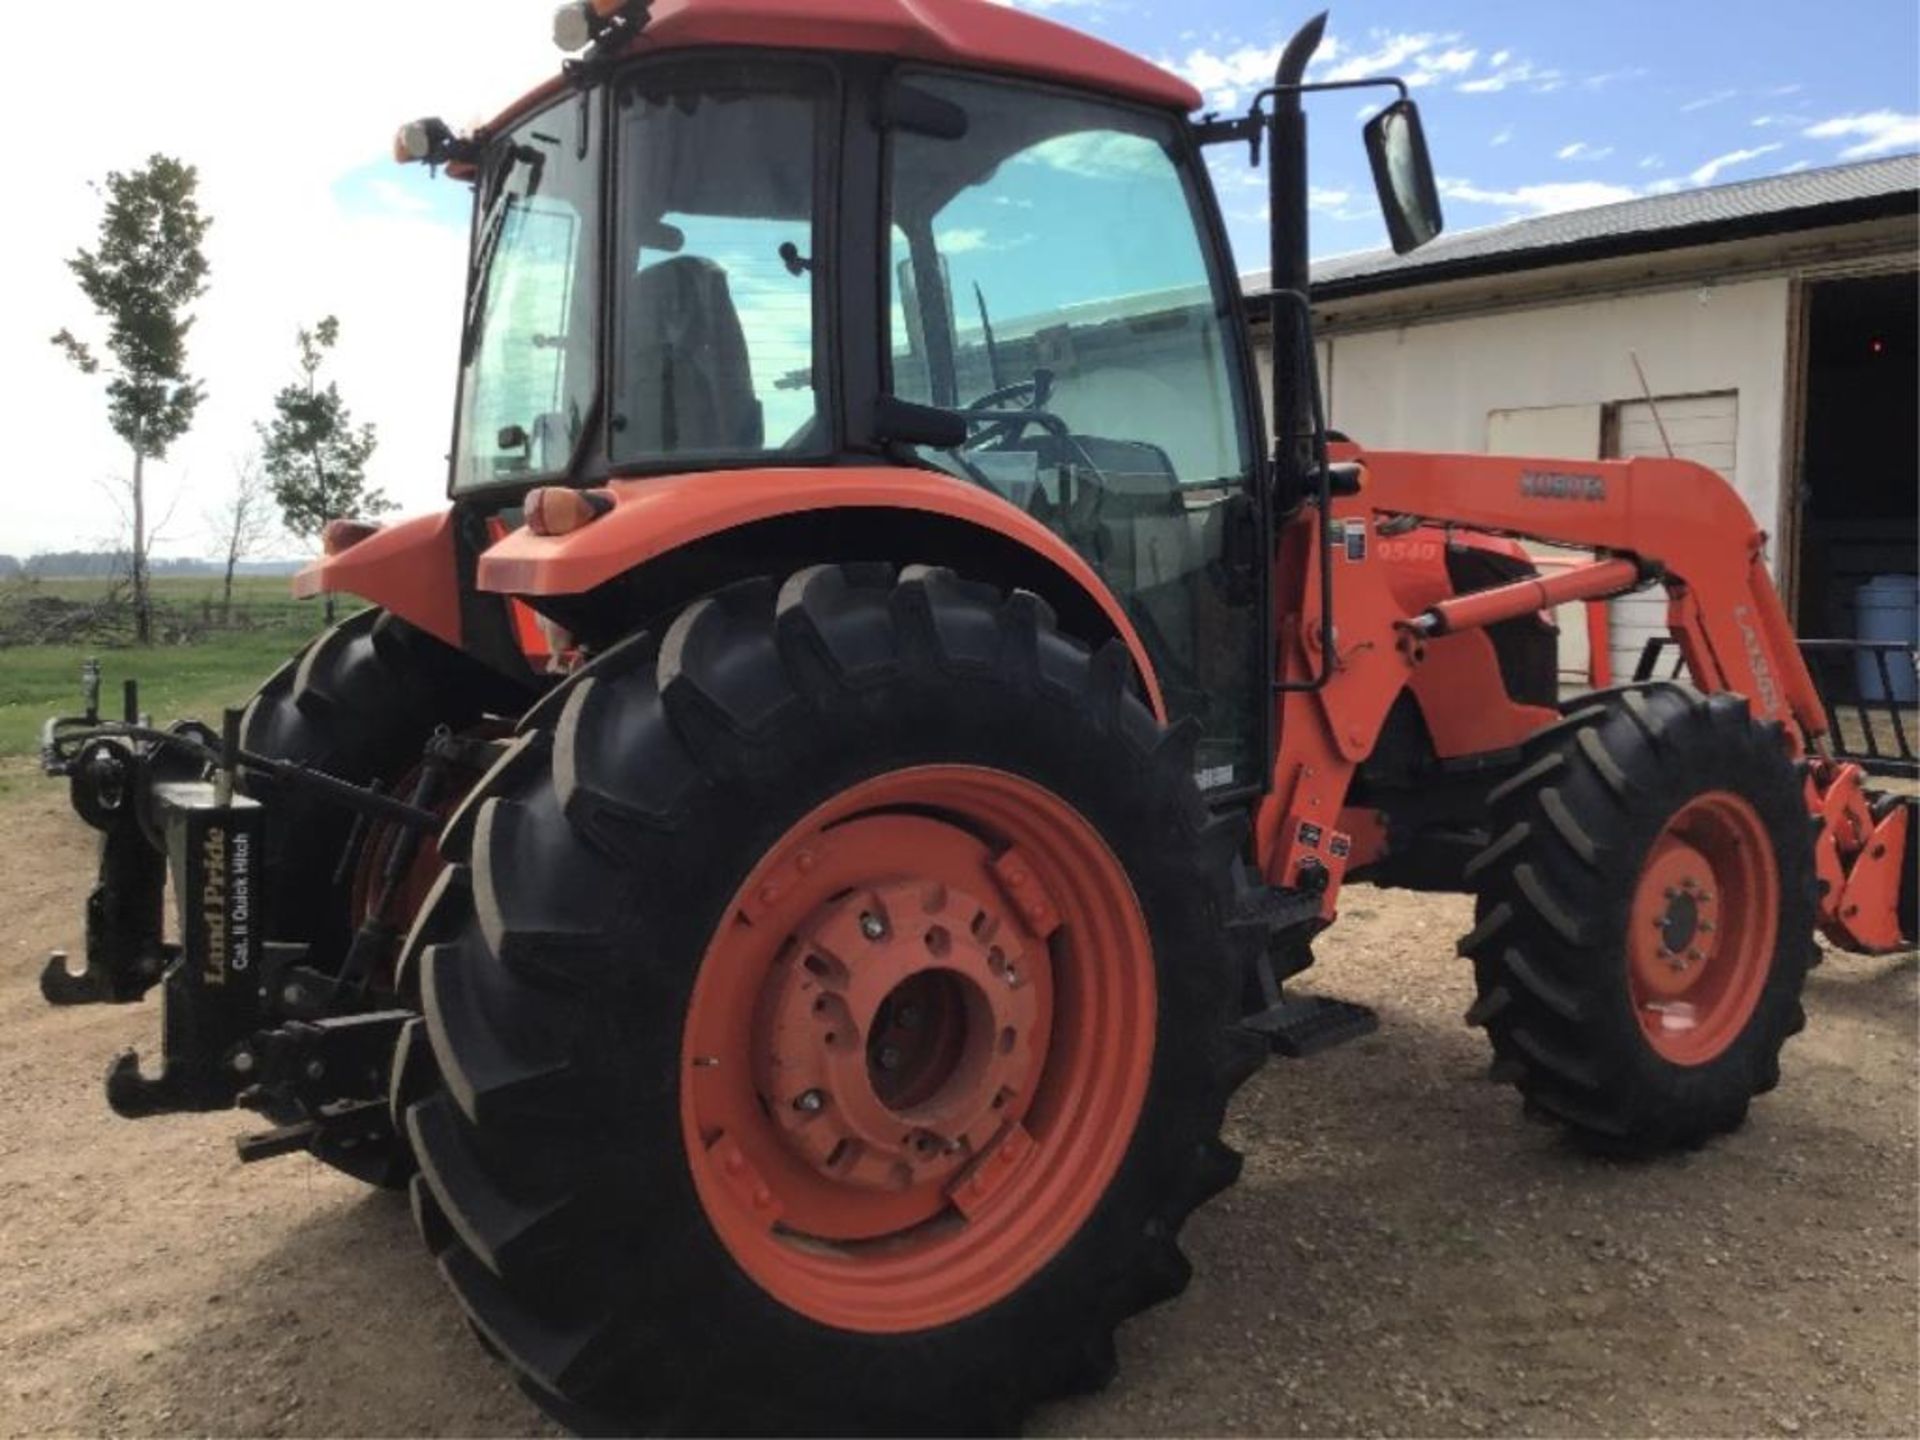 2011 M9540 Kubota Tractor W/ LA353 Front End Loader & Bucket, 2 Forks(may sell sepesrate), 1104 - Image 5 of 12